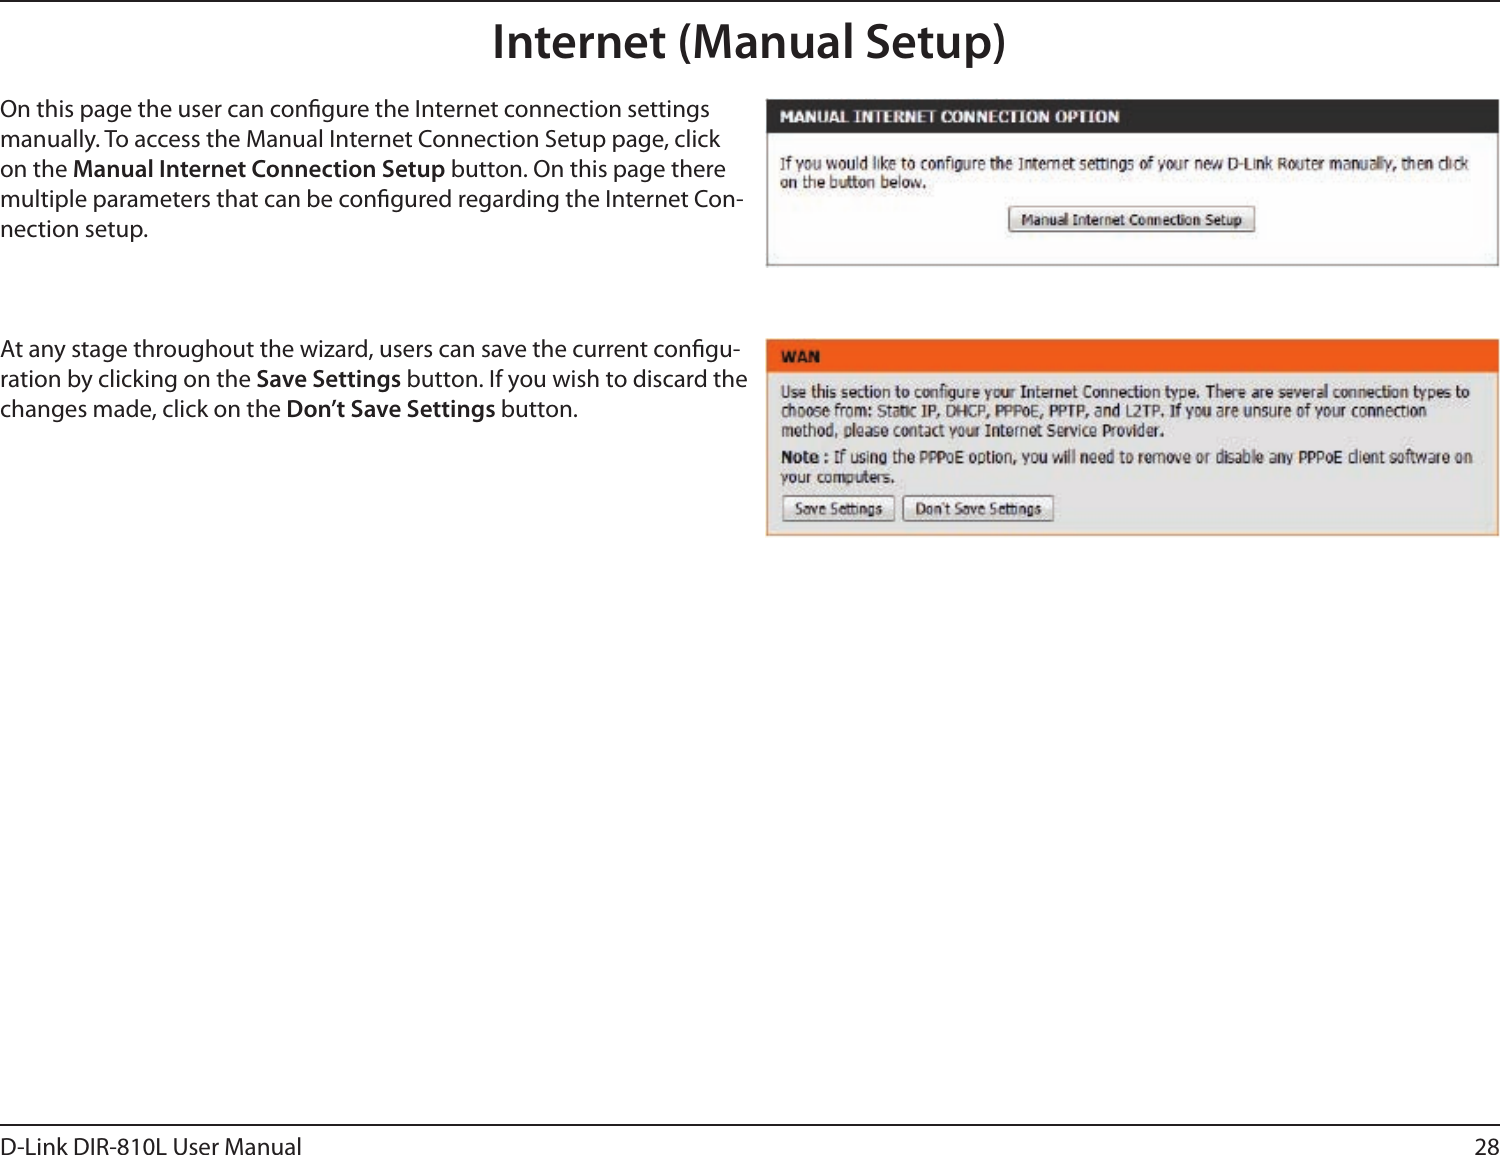 28D-Link DIR-810L User ManualInternet (Manual Setup)On this page the user can congure the Internet connection settings manually. To access the Manual Internet Connection Setup page, click on the Manual Internet Connection Setup button. On this page there multiple parameters that can be congured regarding the Internet Con-nection setup. At any stage throughout the wizard, users can save the current congu-ration by clicking on the Save Settings button. If you wish to discard the changes made, click on the Don’t Save Settings button.